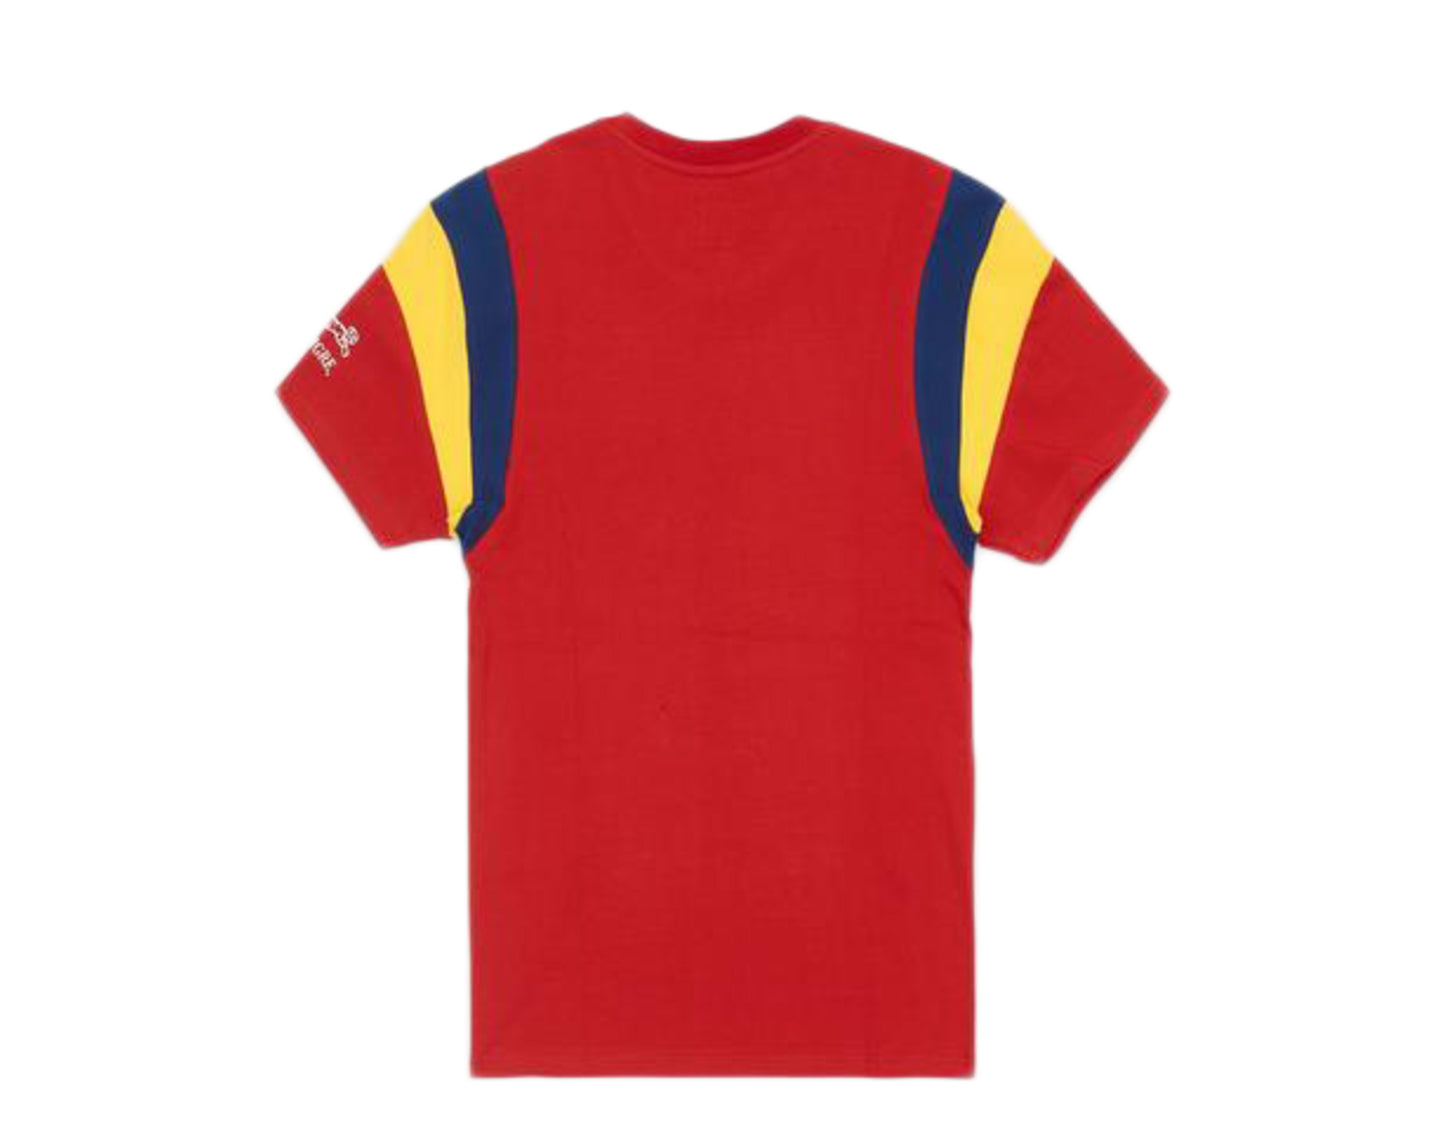 Le Tigre Booster Red/Navy/Yellow Men's T-Shirt LT531-RED